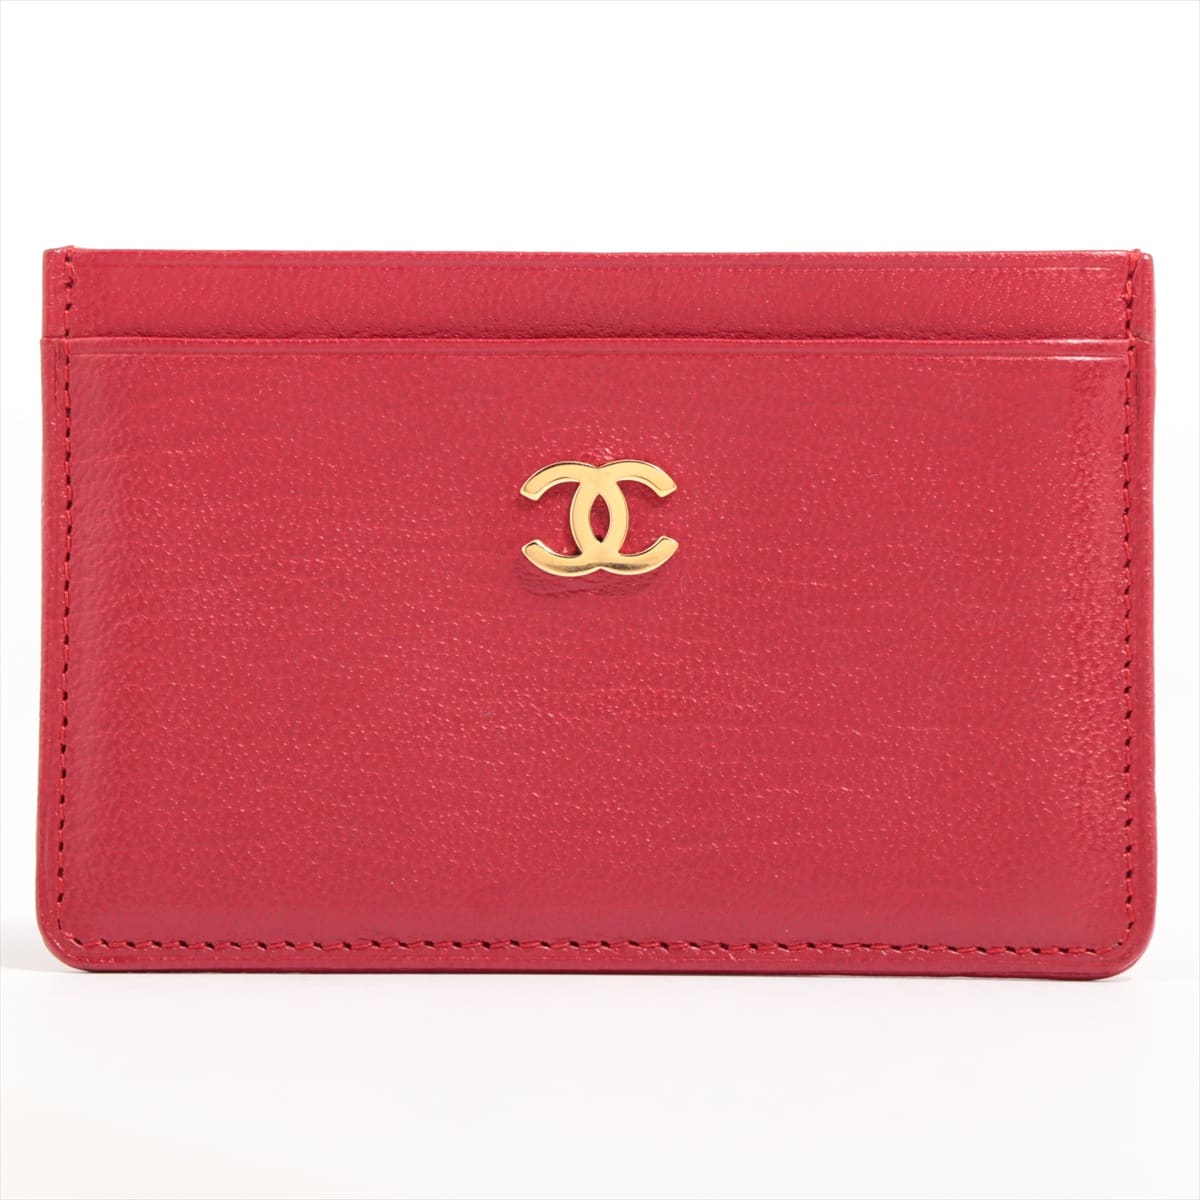 Chanel Coco Mark Leather Card Case Red Gold Metal fittings 7XXXXXX